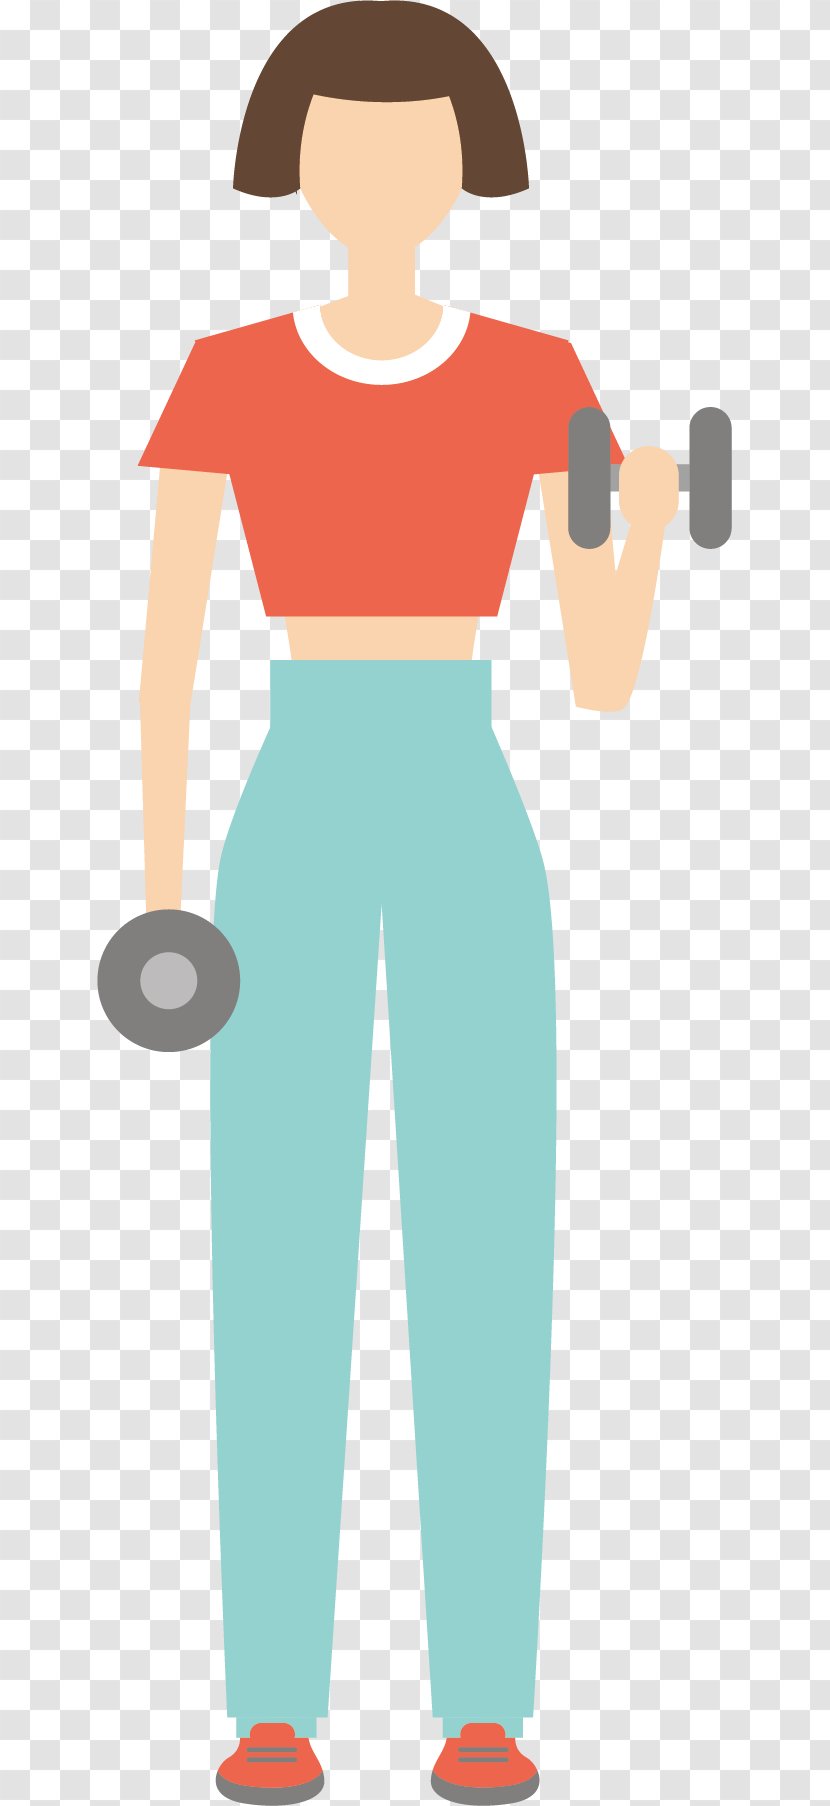 Physical Exercise Illustration - Boy - Hand Lifting Barbell Transparent PNG